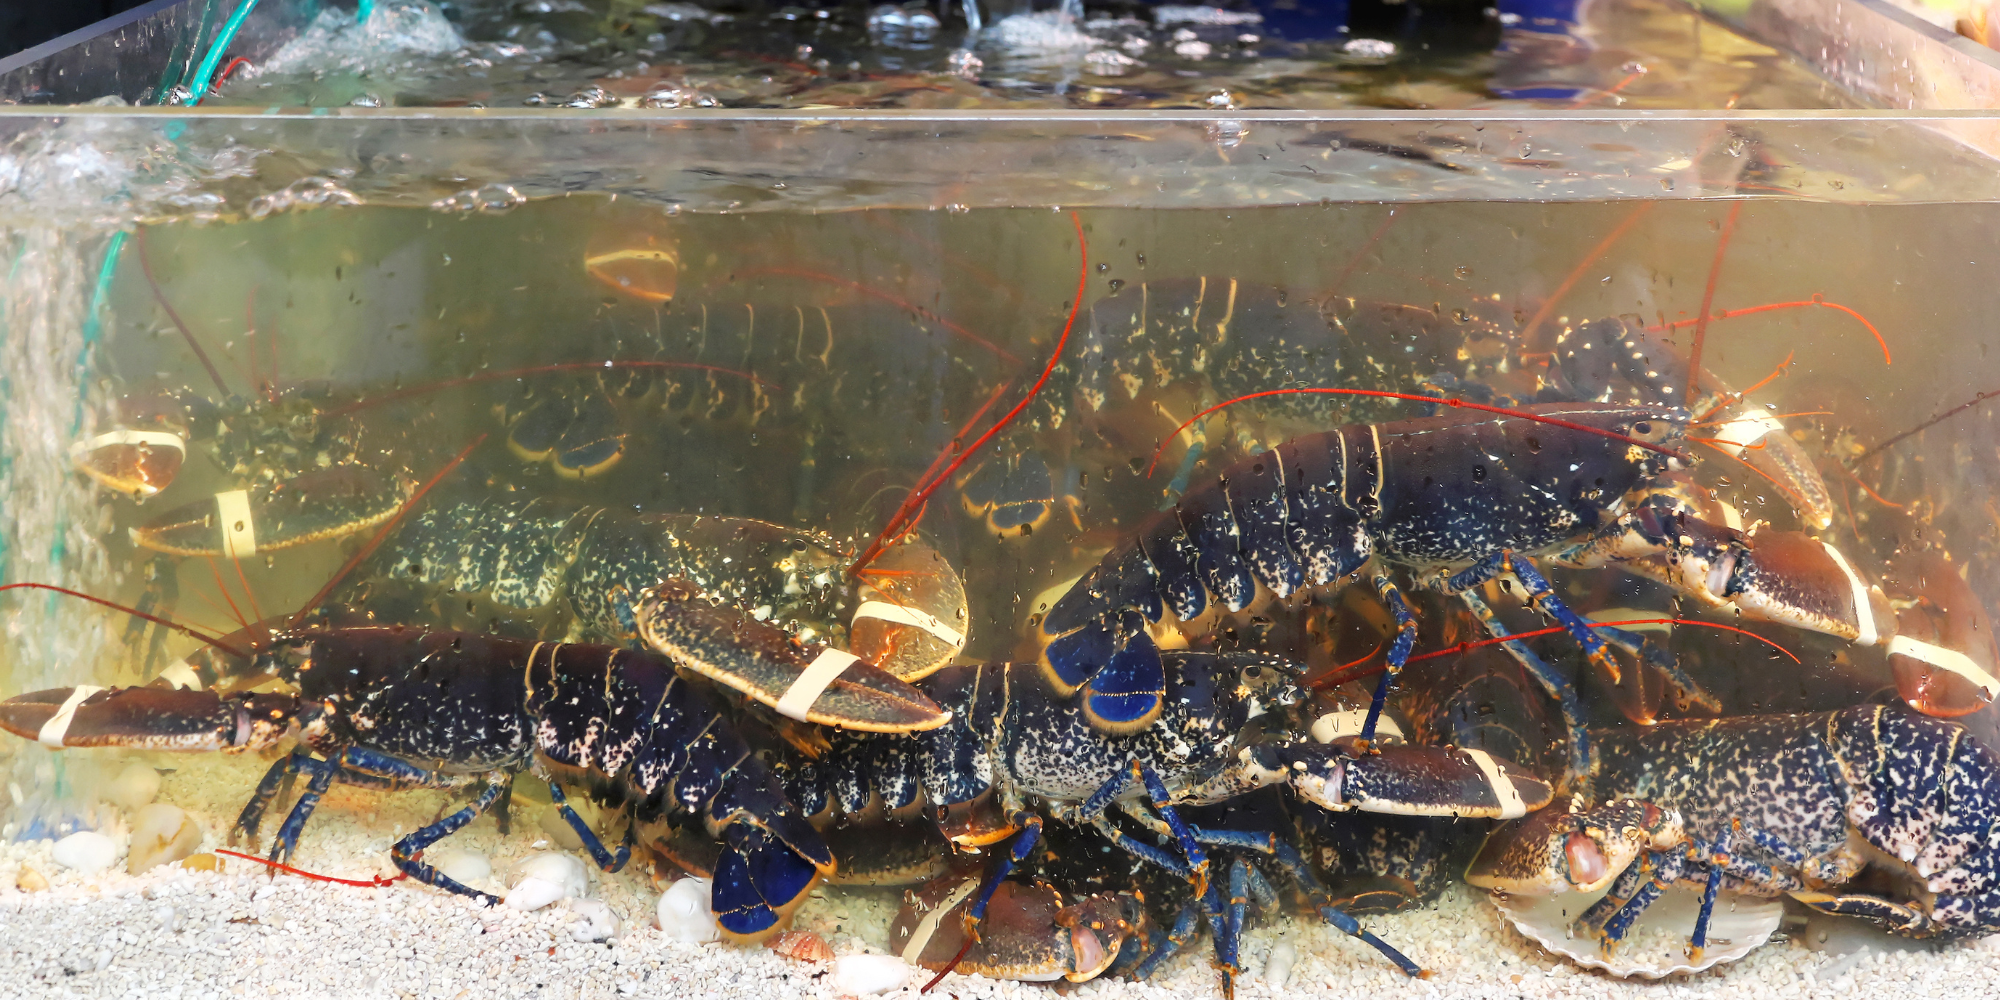 Protecting marine life: Live lobsters in aquarium - Dyrenes Alliance focuses on animal rights and fights against inhumane conditions for marine animals. Support our efforts to ensure humane living conditions for marine creatures